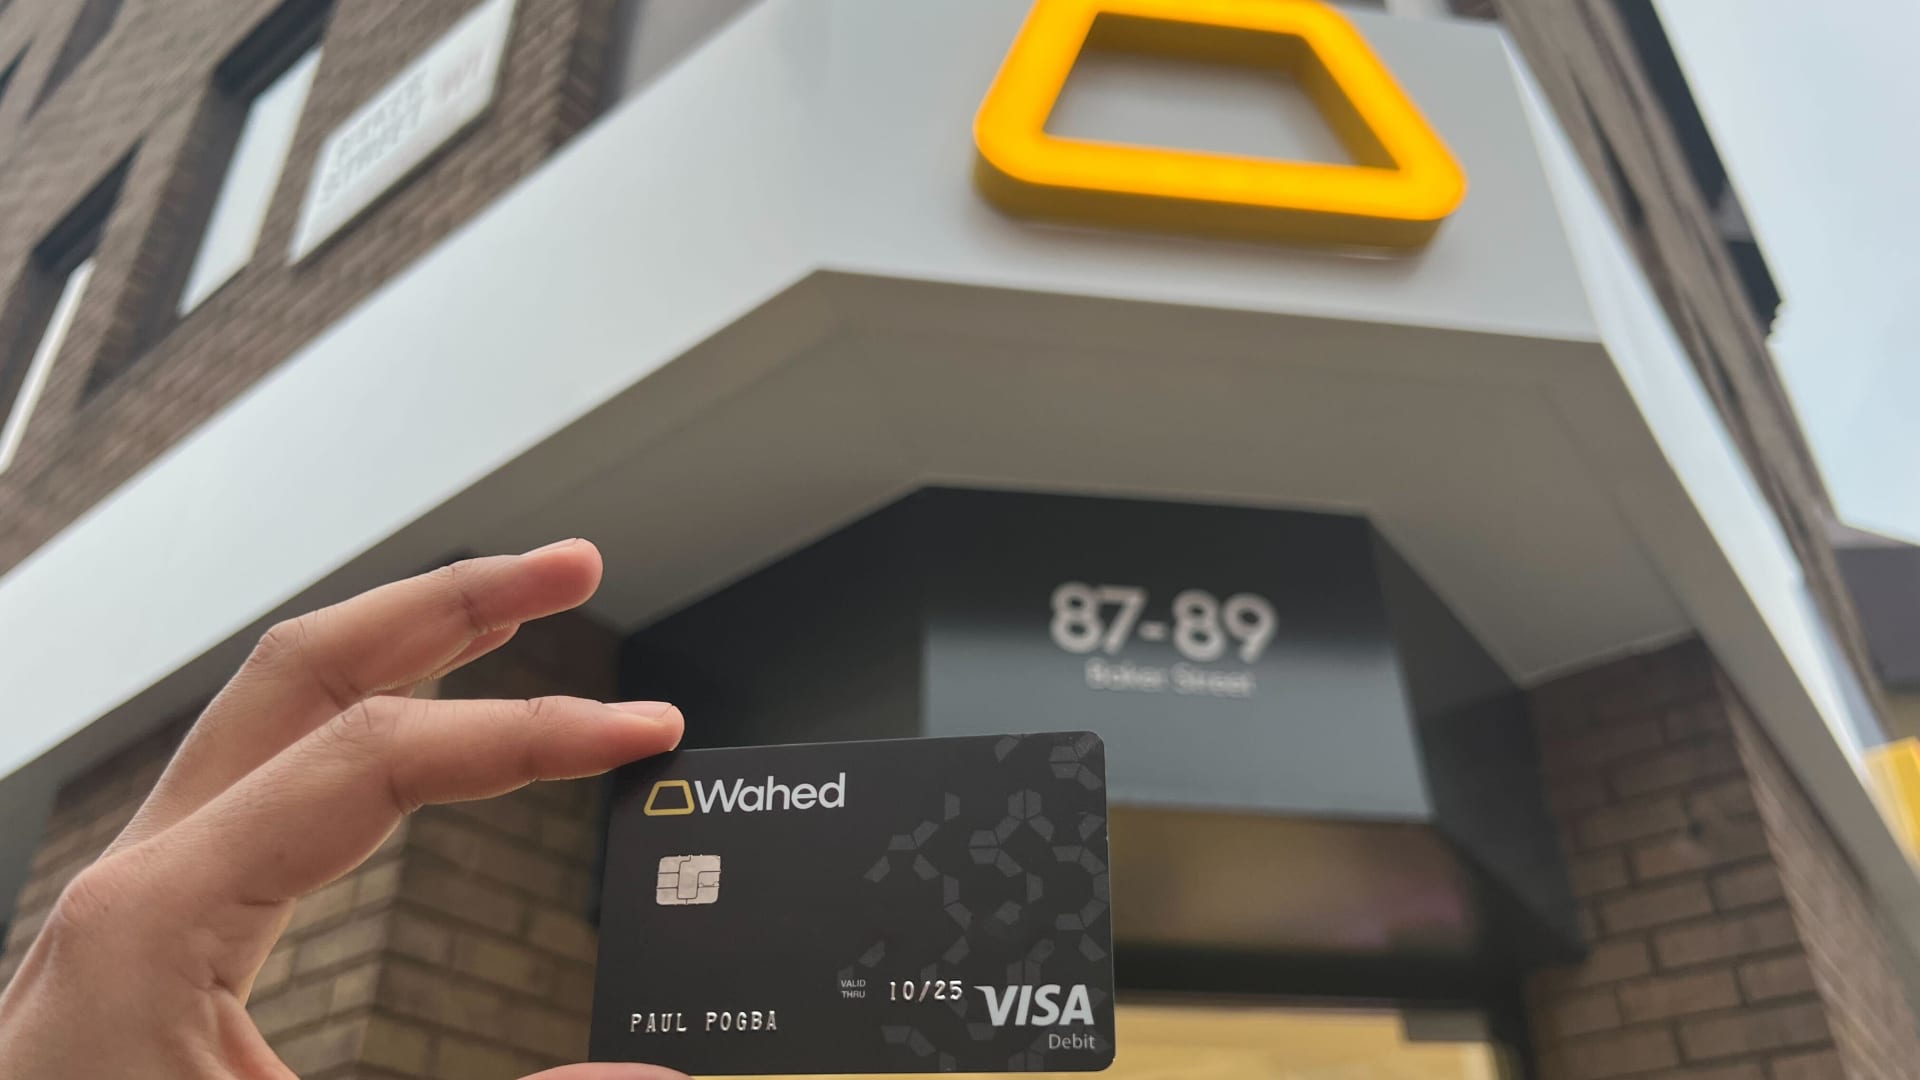 Wahed is debuting a debit card linked to a gold-backed spending account. The startup is backed by French soccer star Paul Pogba.